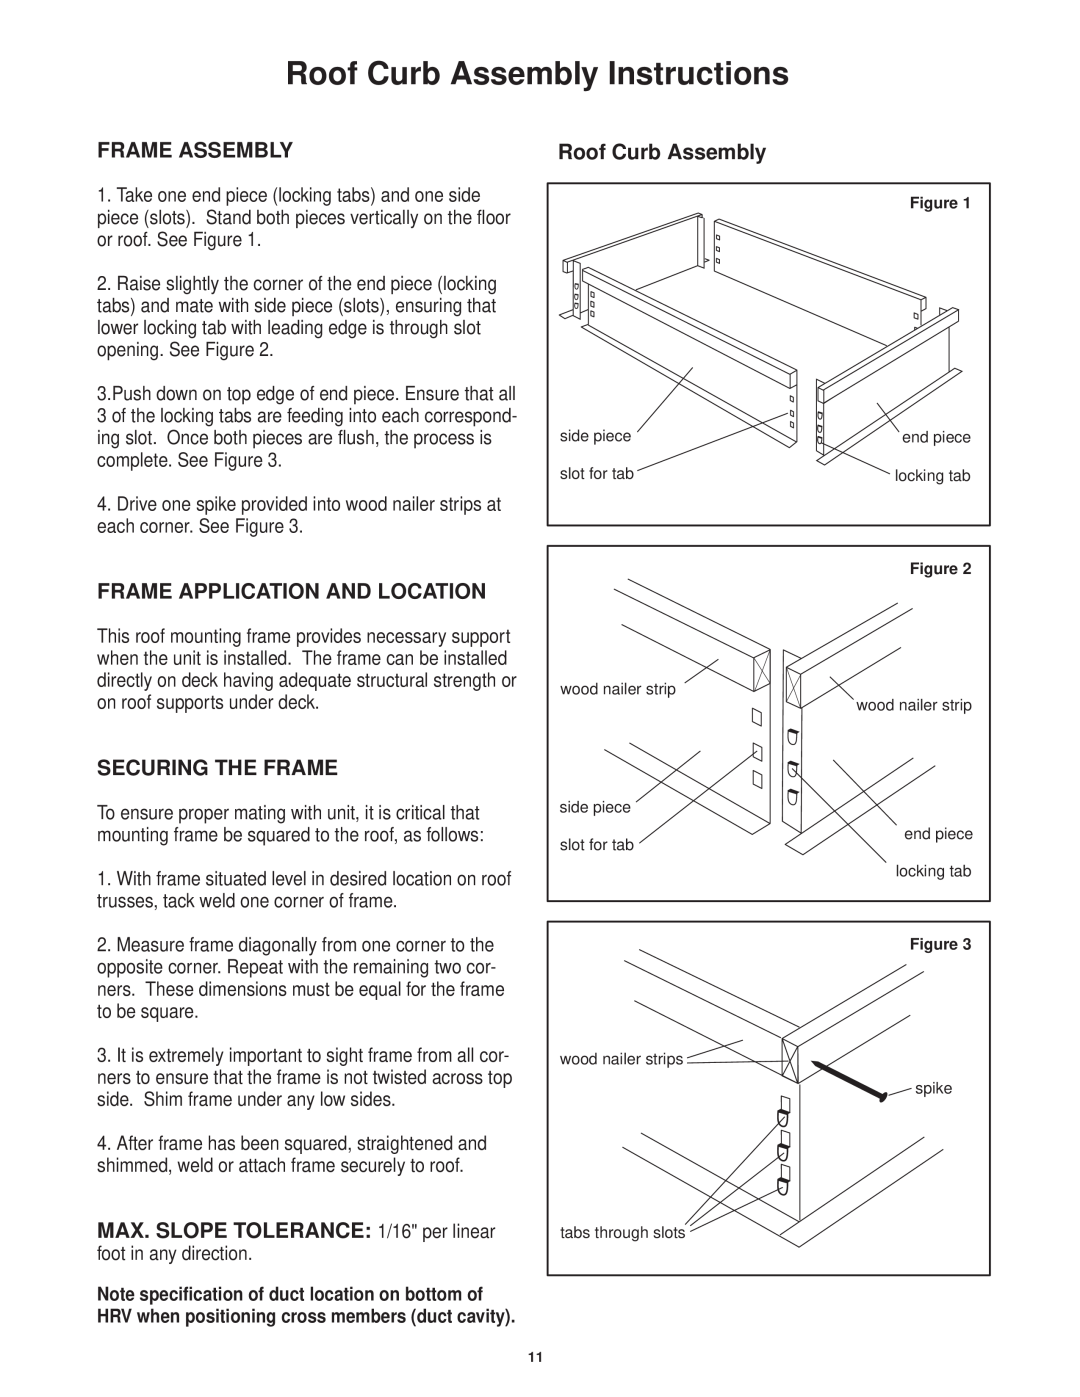 Lifebreath 2500EFD Roof Curb Assembly Instructions, Frame Assembly, Frame Application And Location, Securing The Frame 